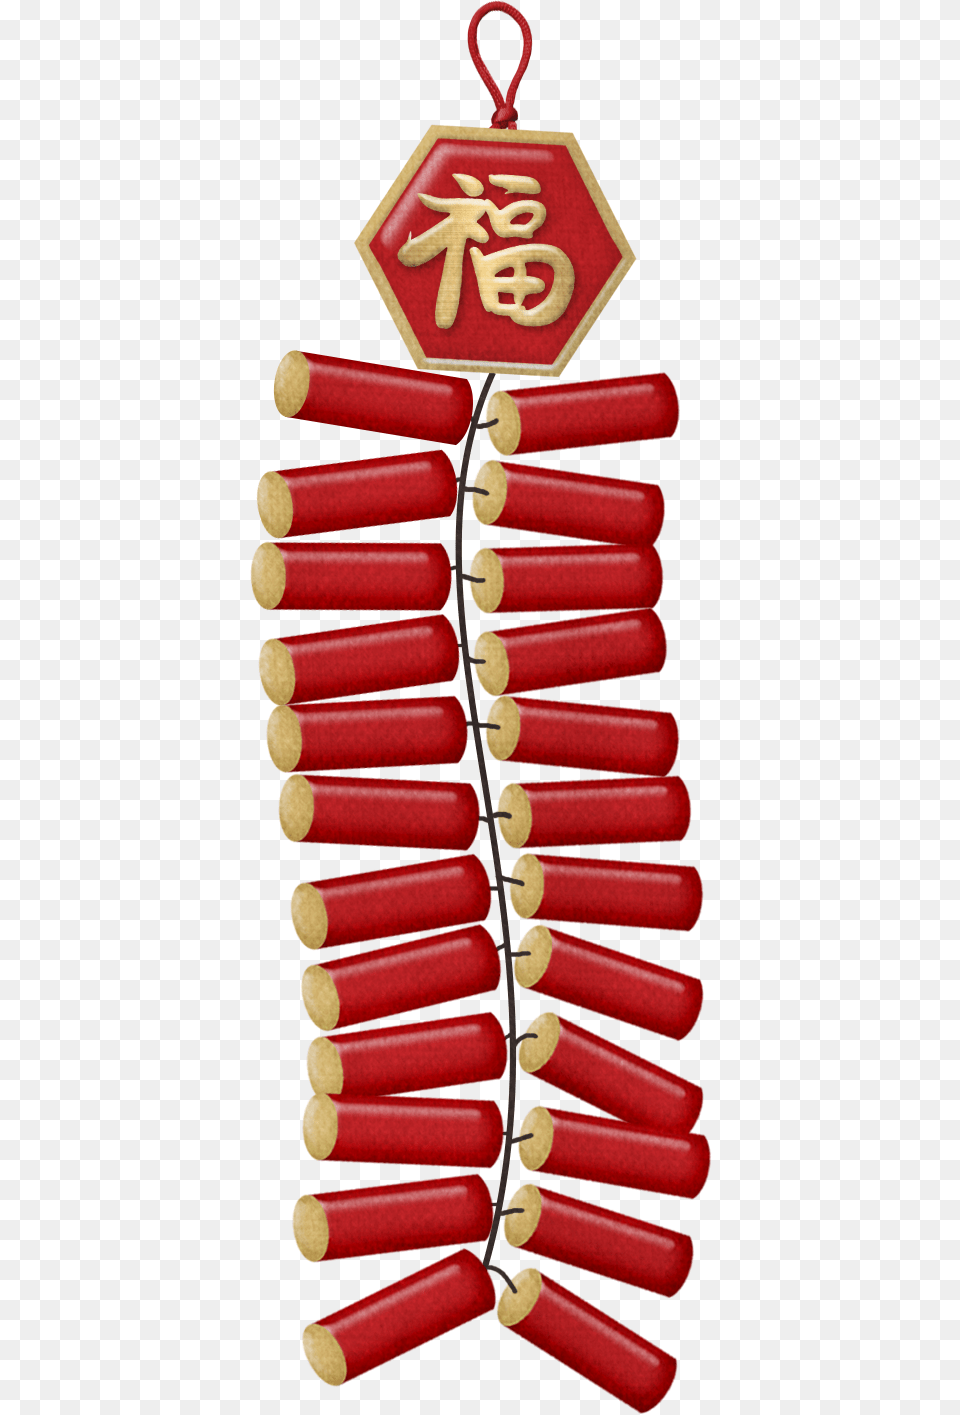 Firecracker Clipart Red Packet Chinese New Year Firecrackers Clipart, Dynamite, Weapon Png Image